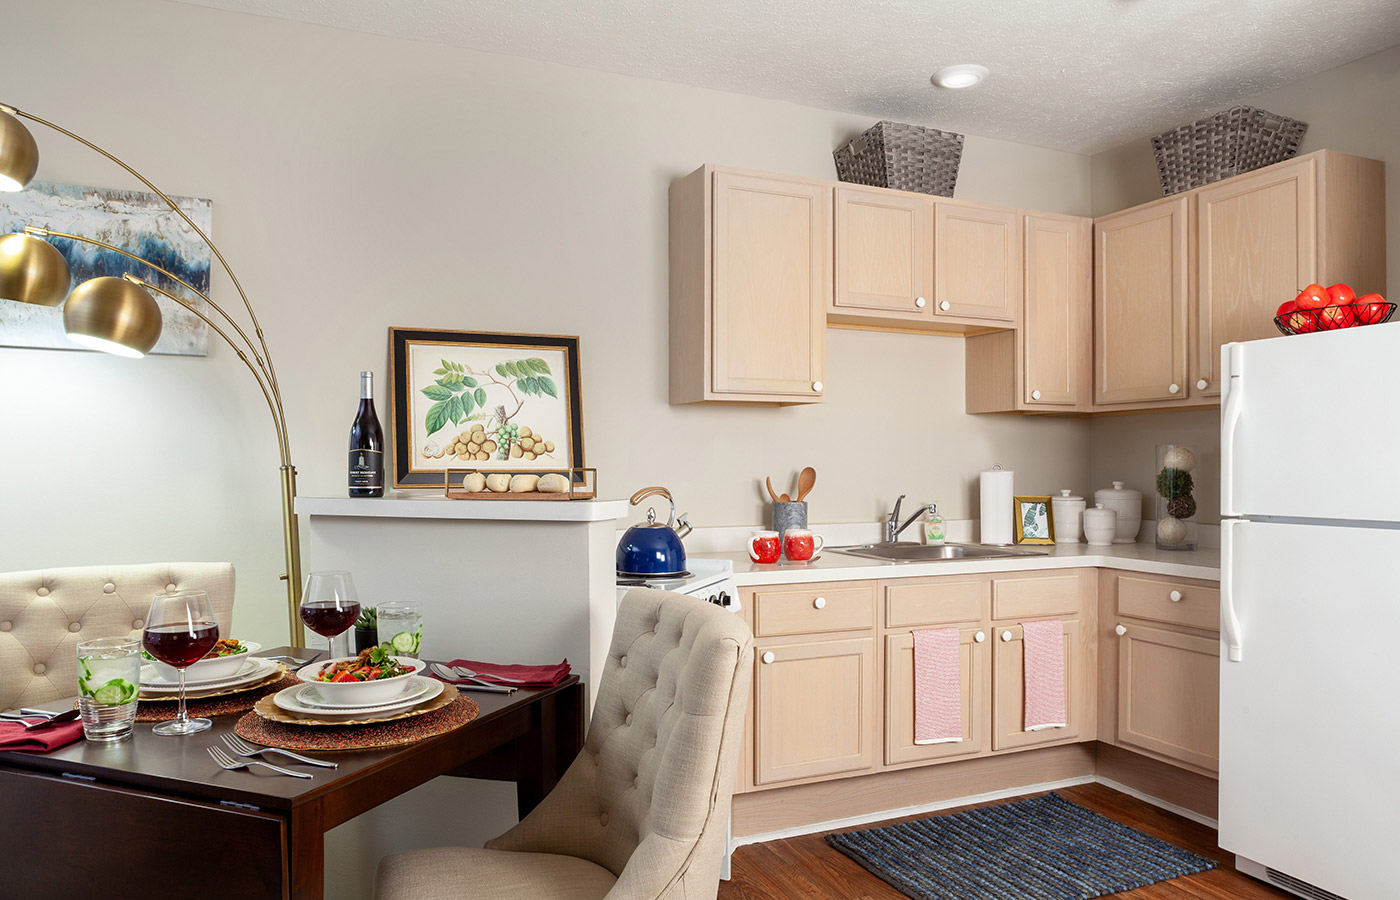 A kitchen in an apartment at The Legacy at Park Crescent.